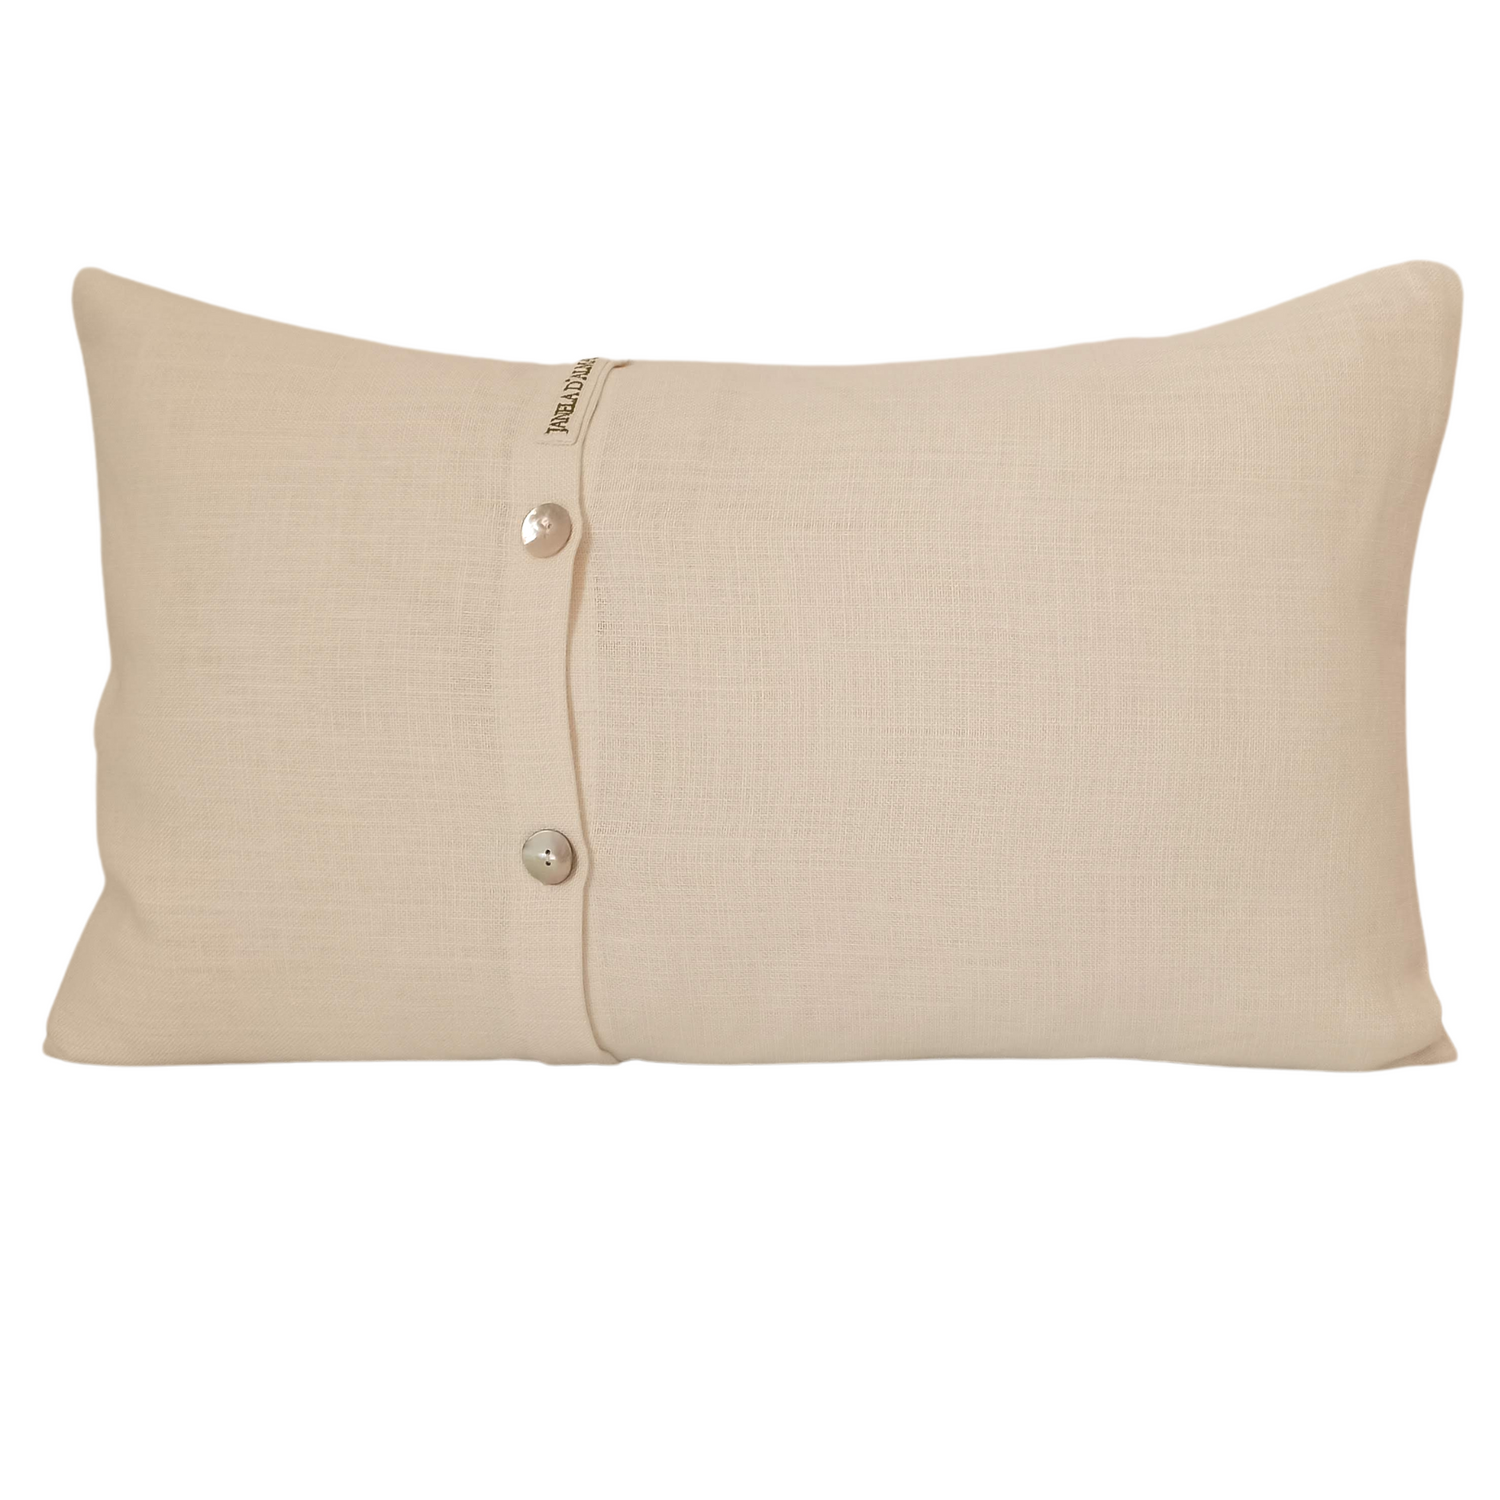 Linen Cushion Cover Butterfly Rectangular - Back Image